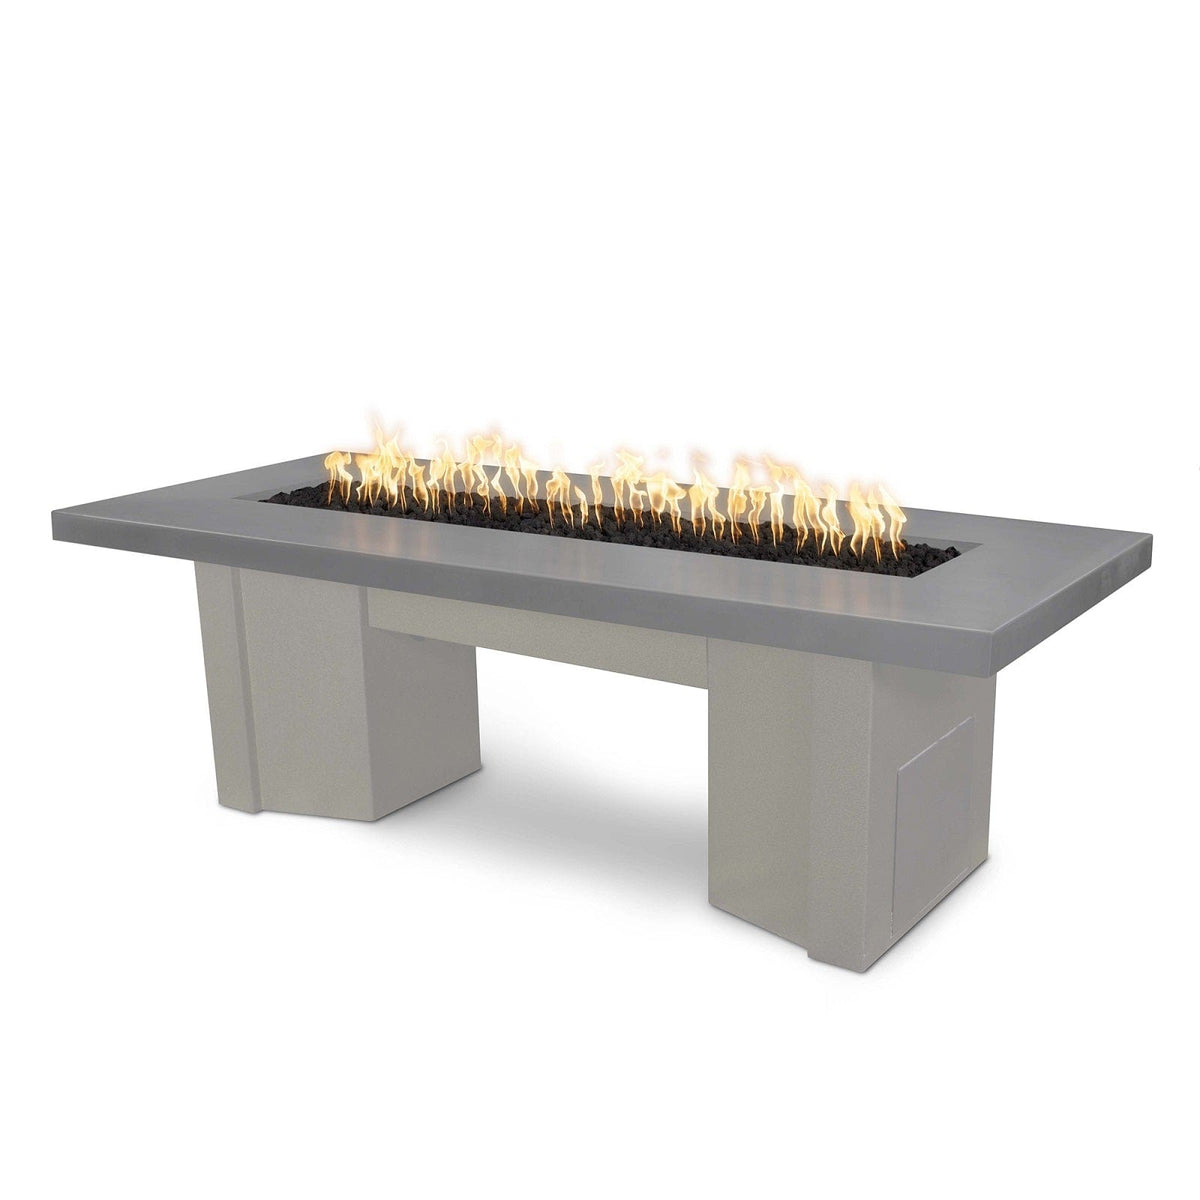 The Outdoor Plus Fire Features Natural Gray (-NGY) / Pewter Powder Coated Steel (-PEW) The Outdoor Plus 60&quot; Alameda Fire Table Smooth Concrete in Natural Gas - Match Lit with Flame Sense System / OPT-ALMGFRC60FSML-NG